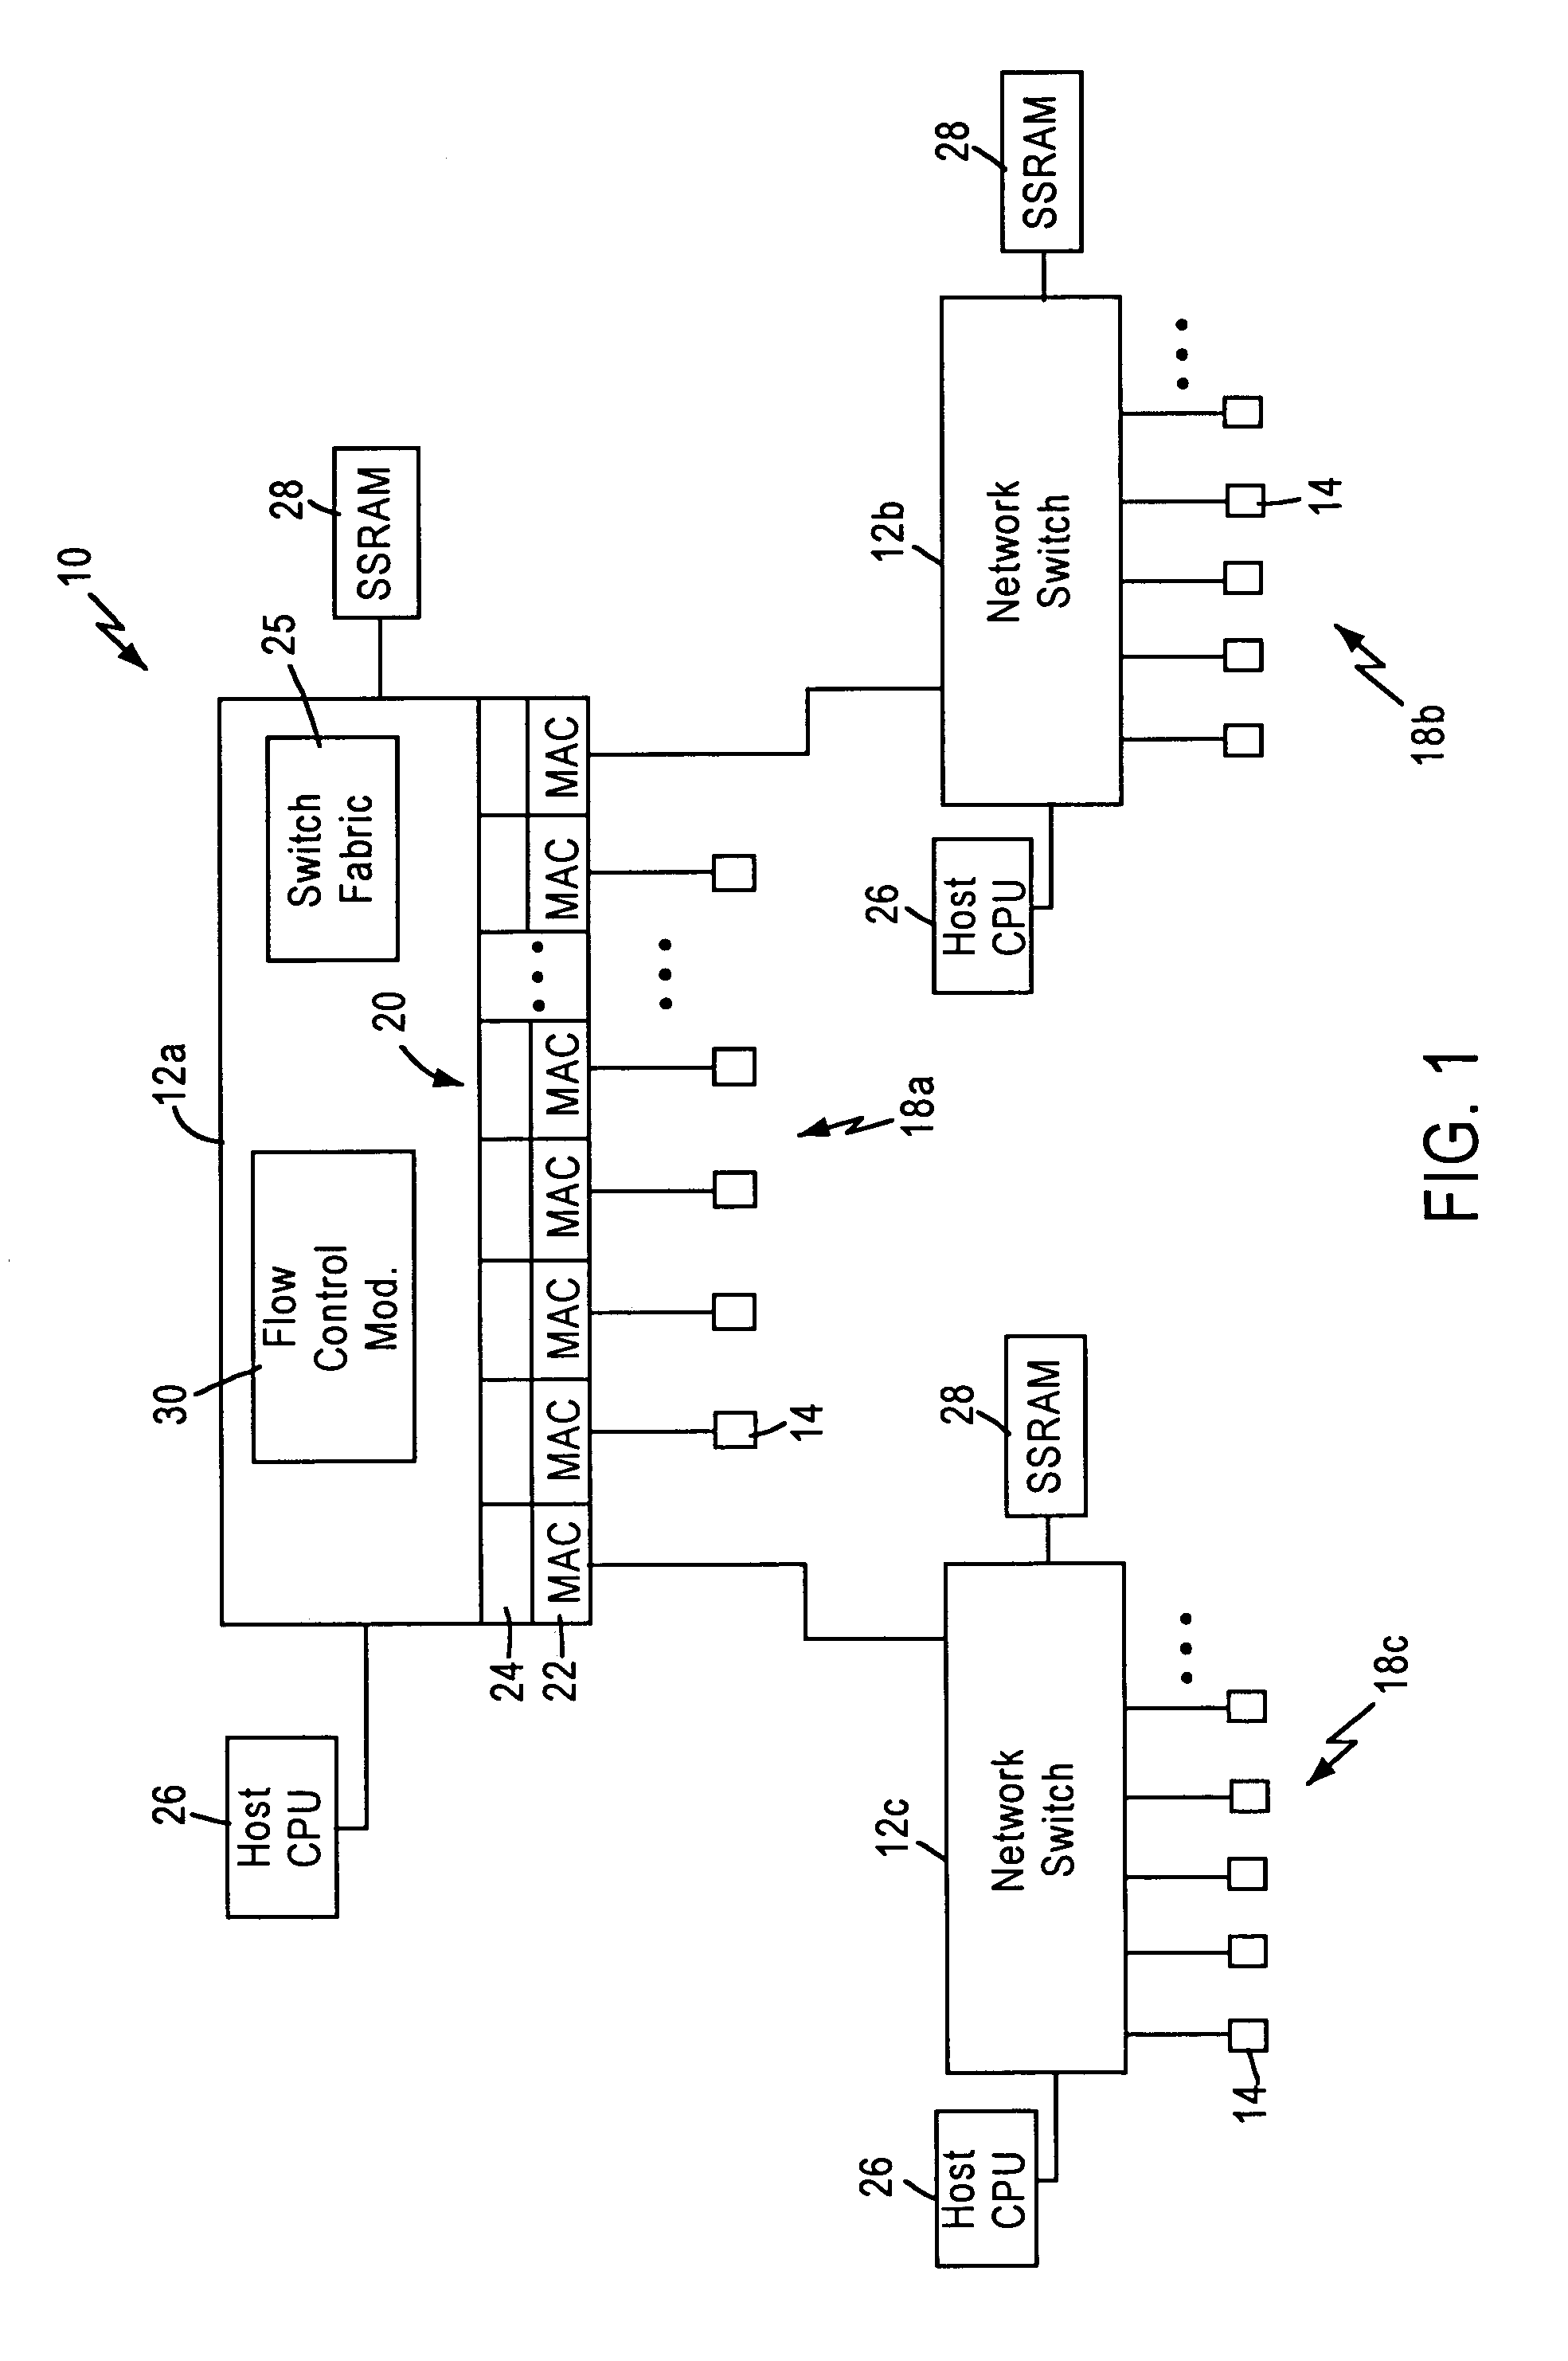 Flow control arrangement in a network switch based on priority traffic